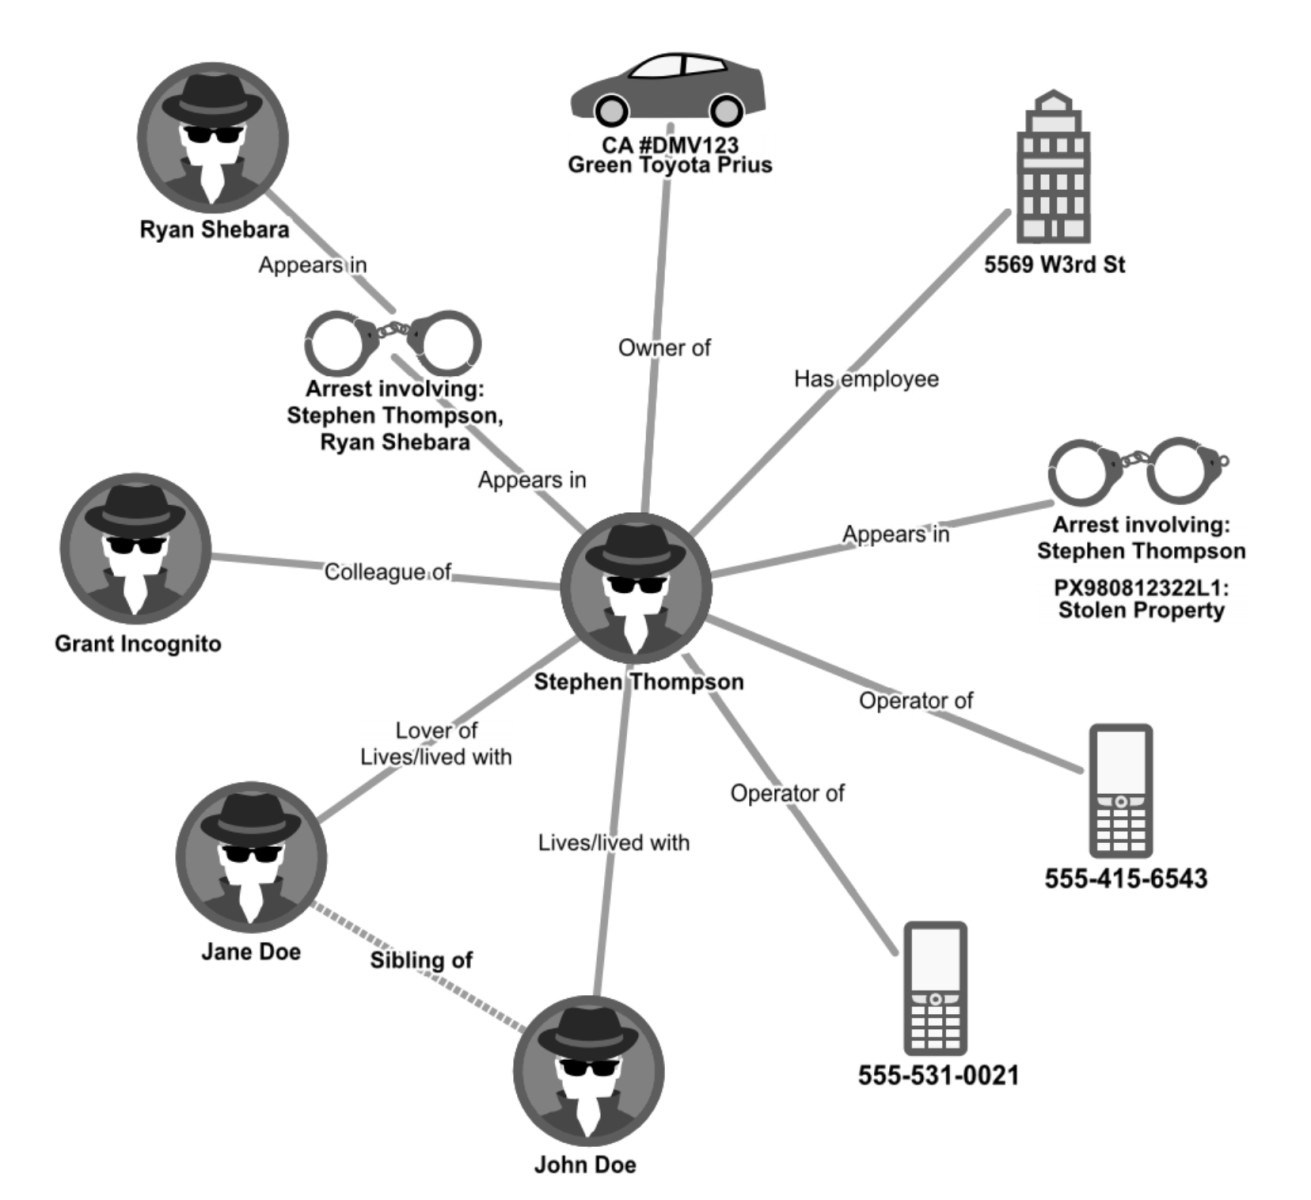 Diagram showing a figure, Stephen Thompson, at the center with many radial connections—to phones, jobs, roommates, car ownership, arrest records, etc.